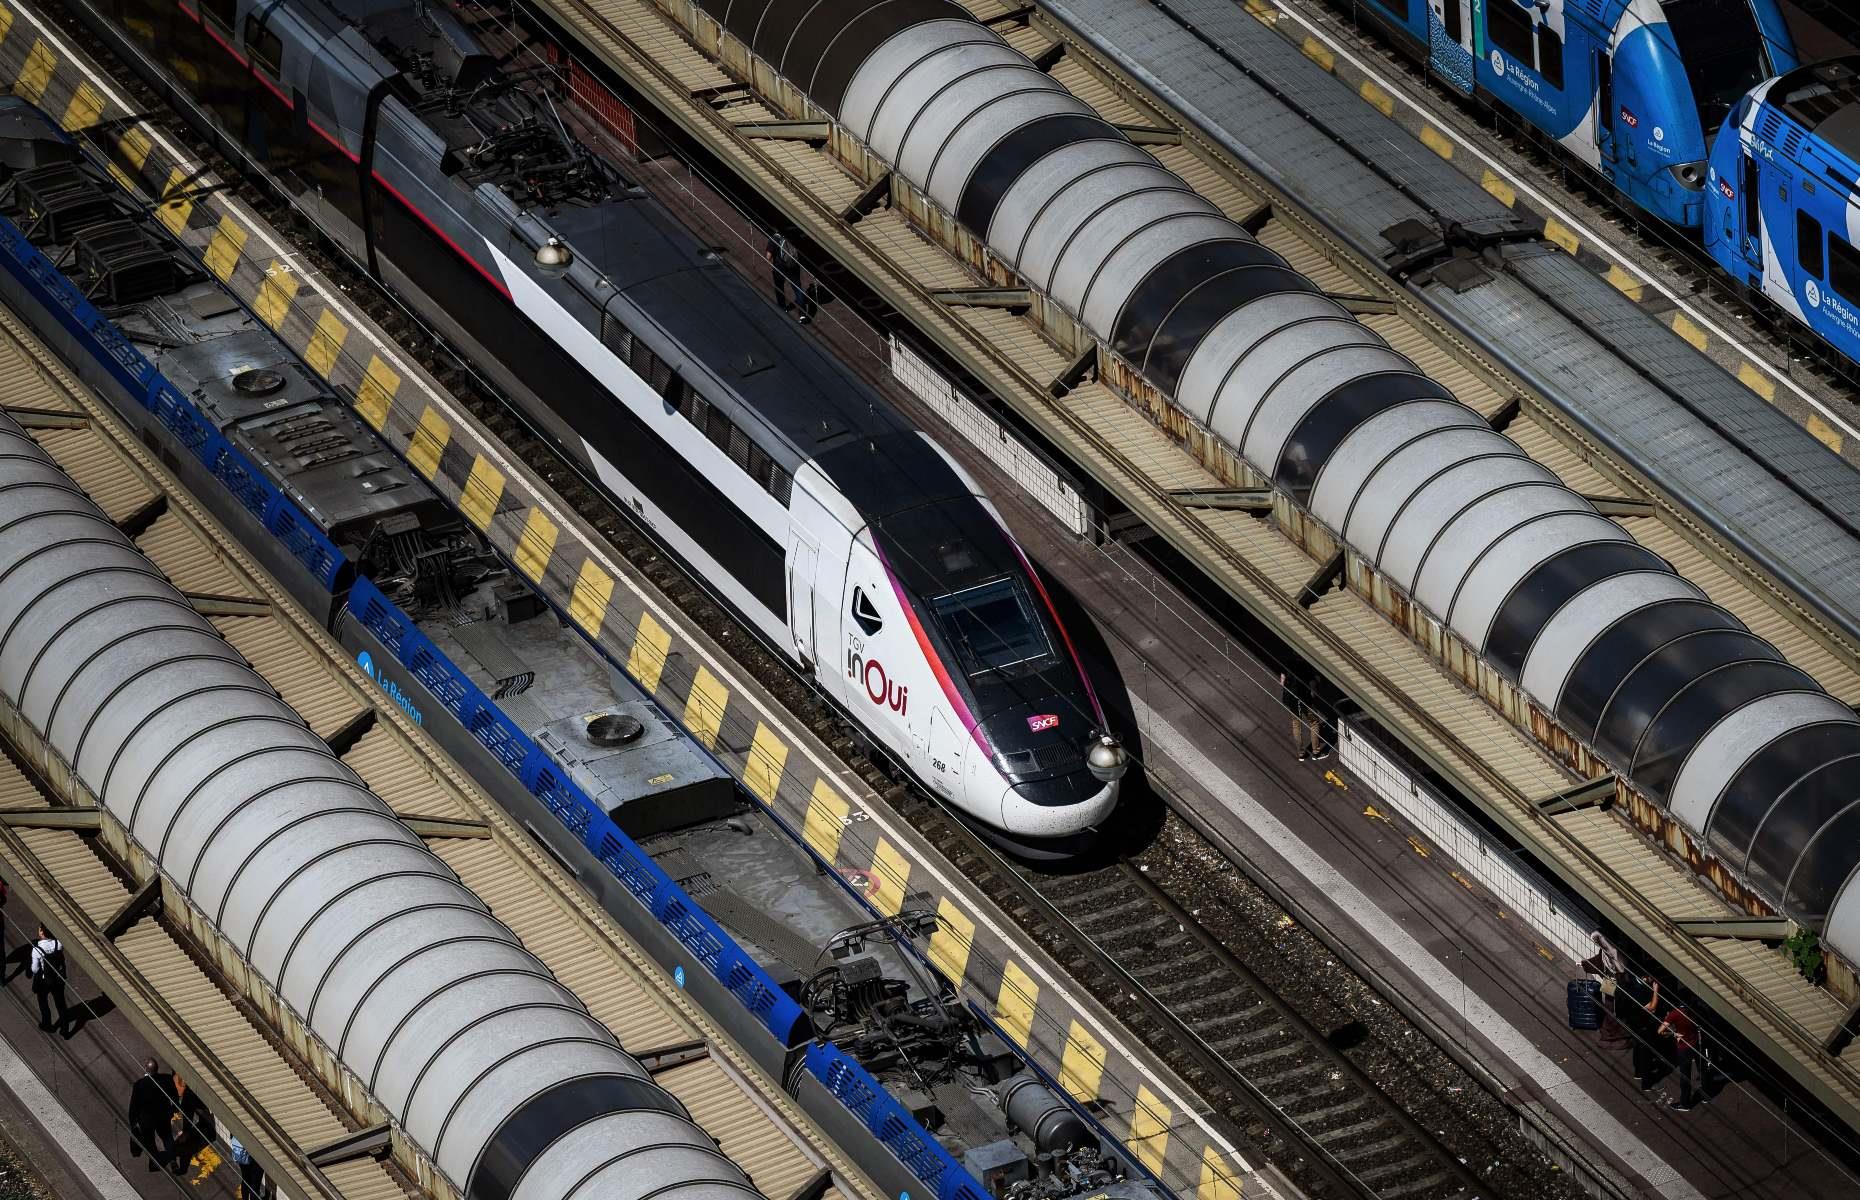 <p>Fancy a high-speed railway across Europe? Rail industry leaders plan to create a vast network of super-fast trains between every major city in the European Union. The new rail lines will make travel across Europe easier, quicker and greener, in a bid to encourage more passengers to turn away from air travel. </p>